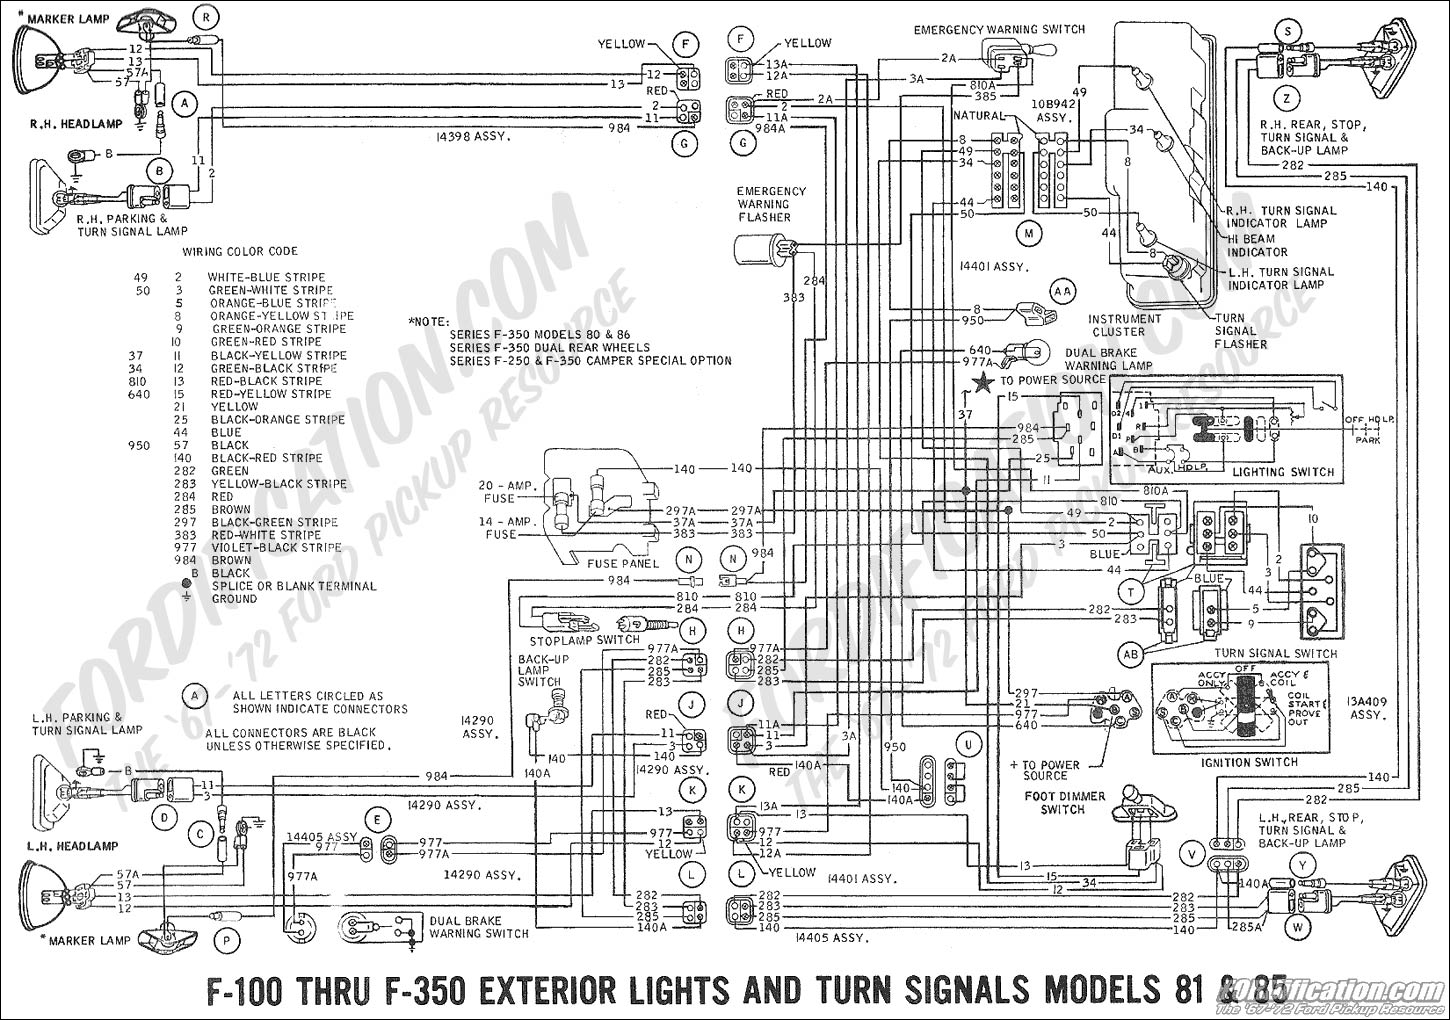 1996 Ford F250 Tail Light Wiring Diagram from www.fordification.com